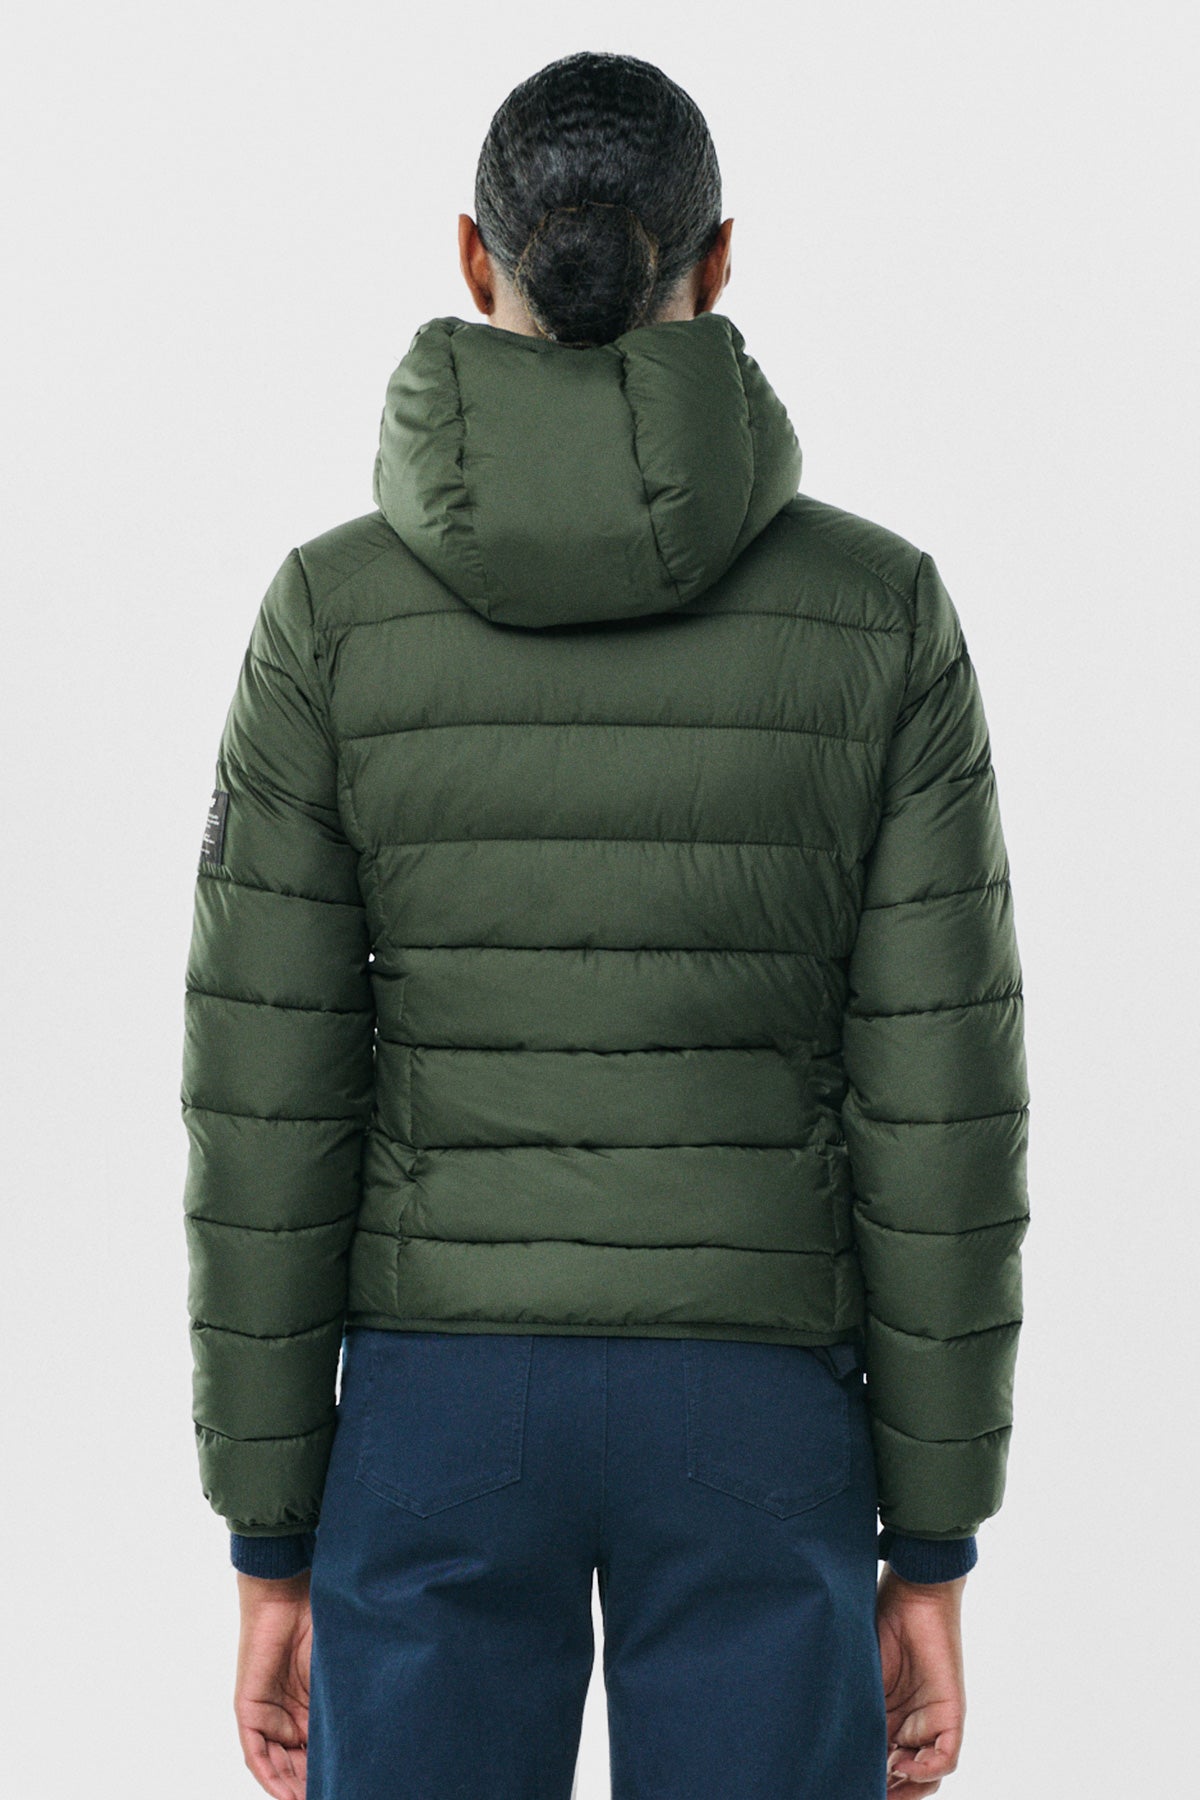 FOREST NIGHT ASP JACKET